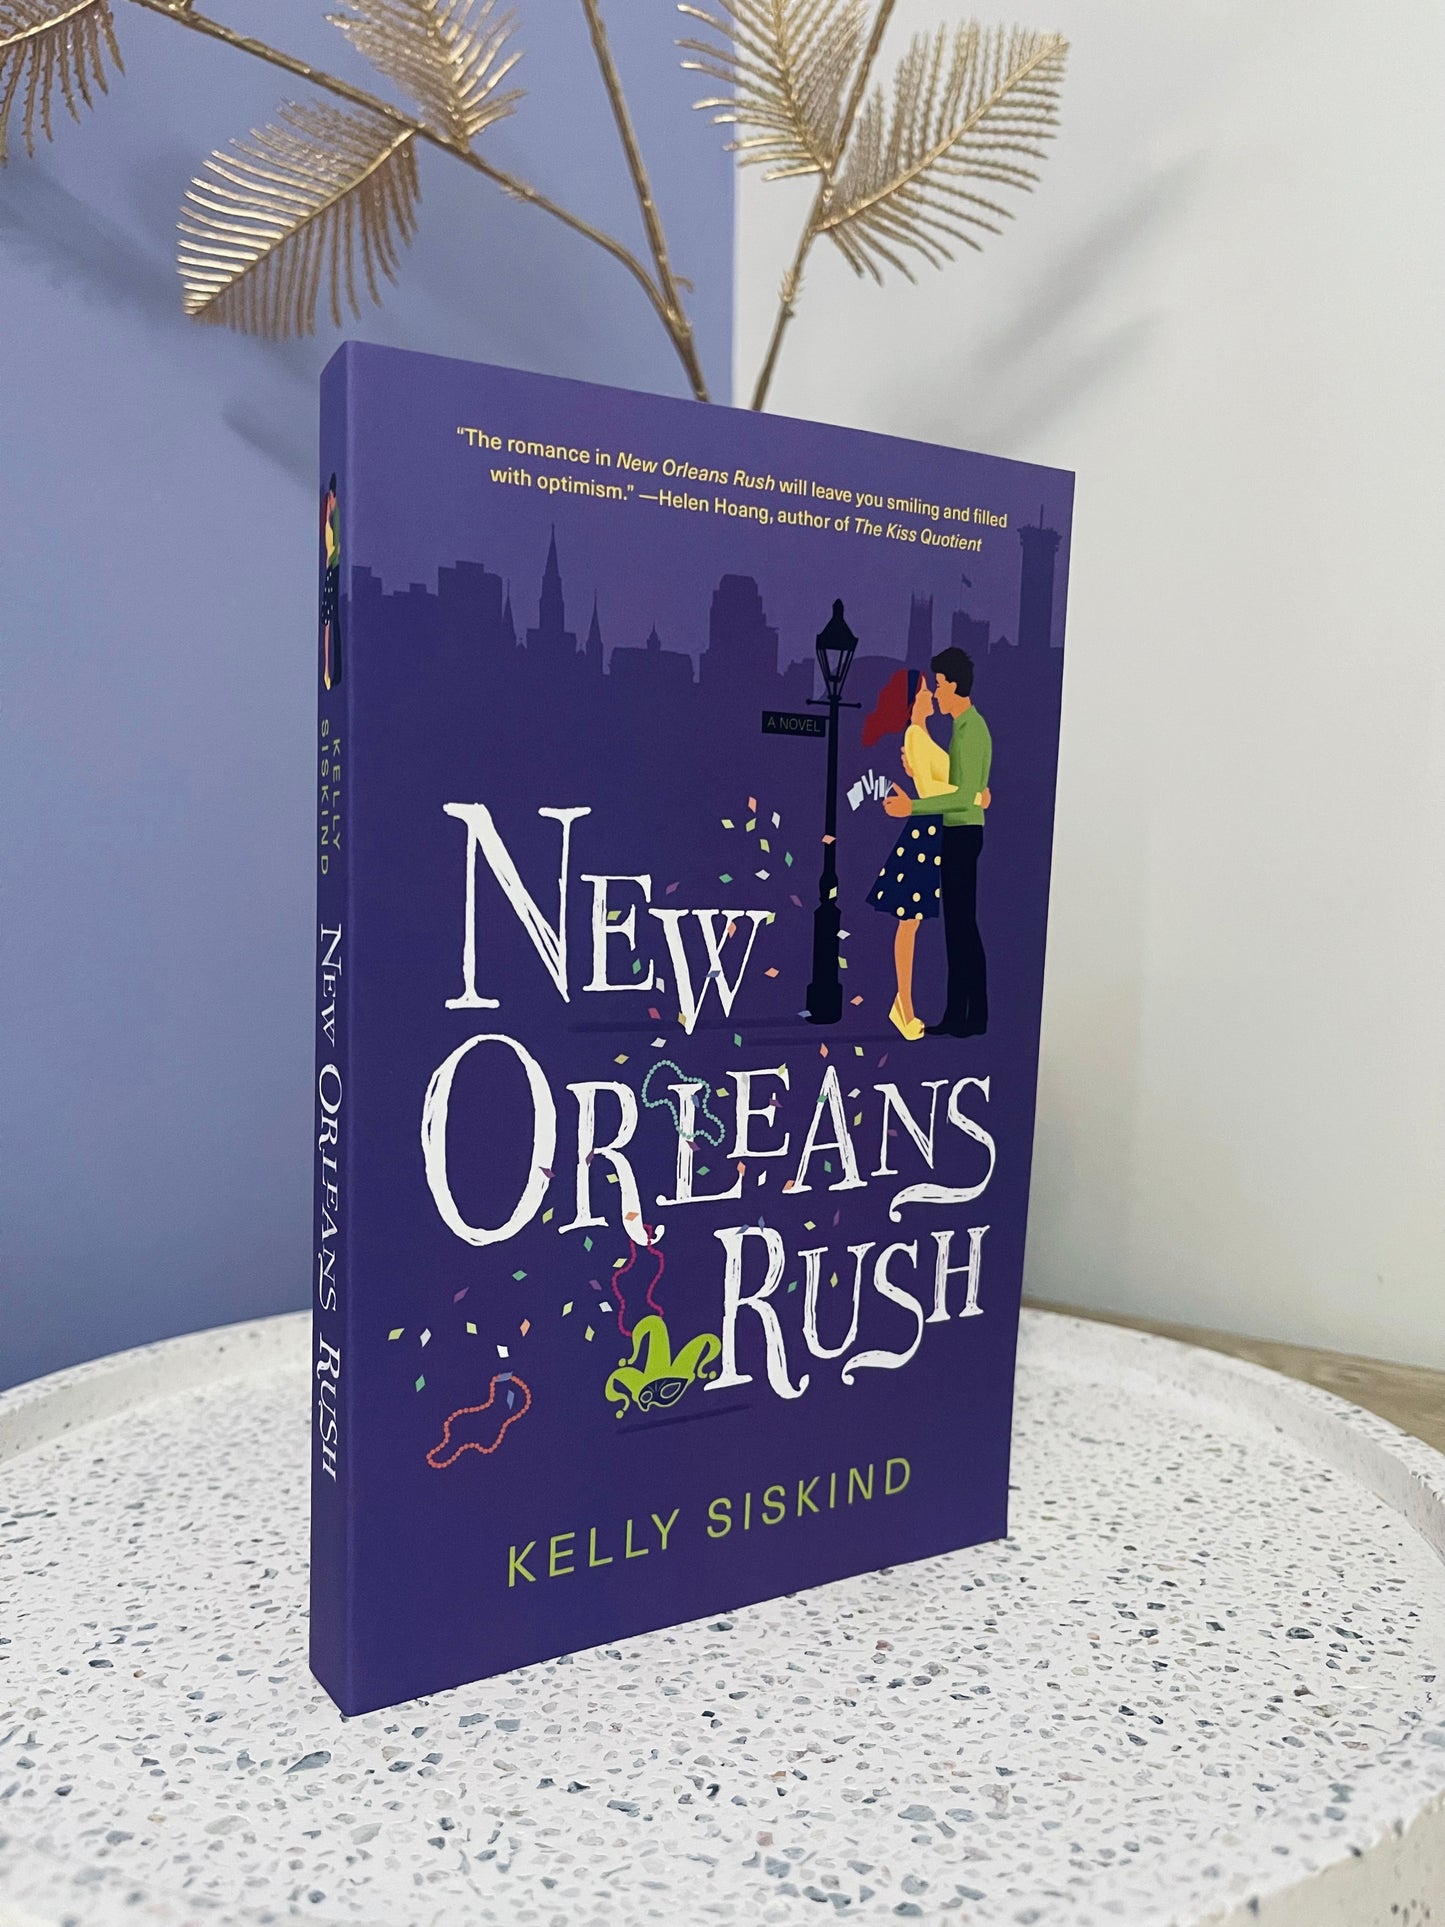 New Orleans Rush by Kelly Siskind